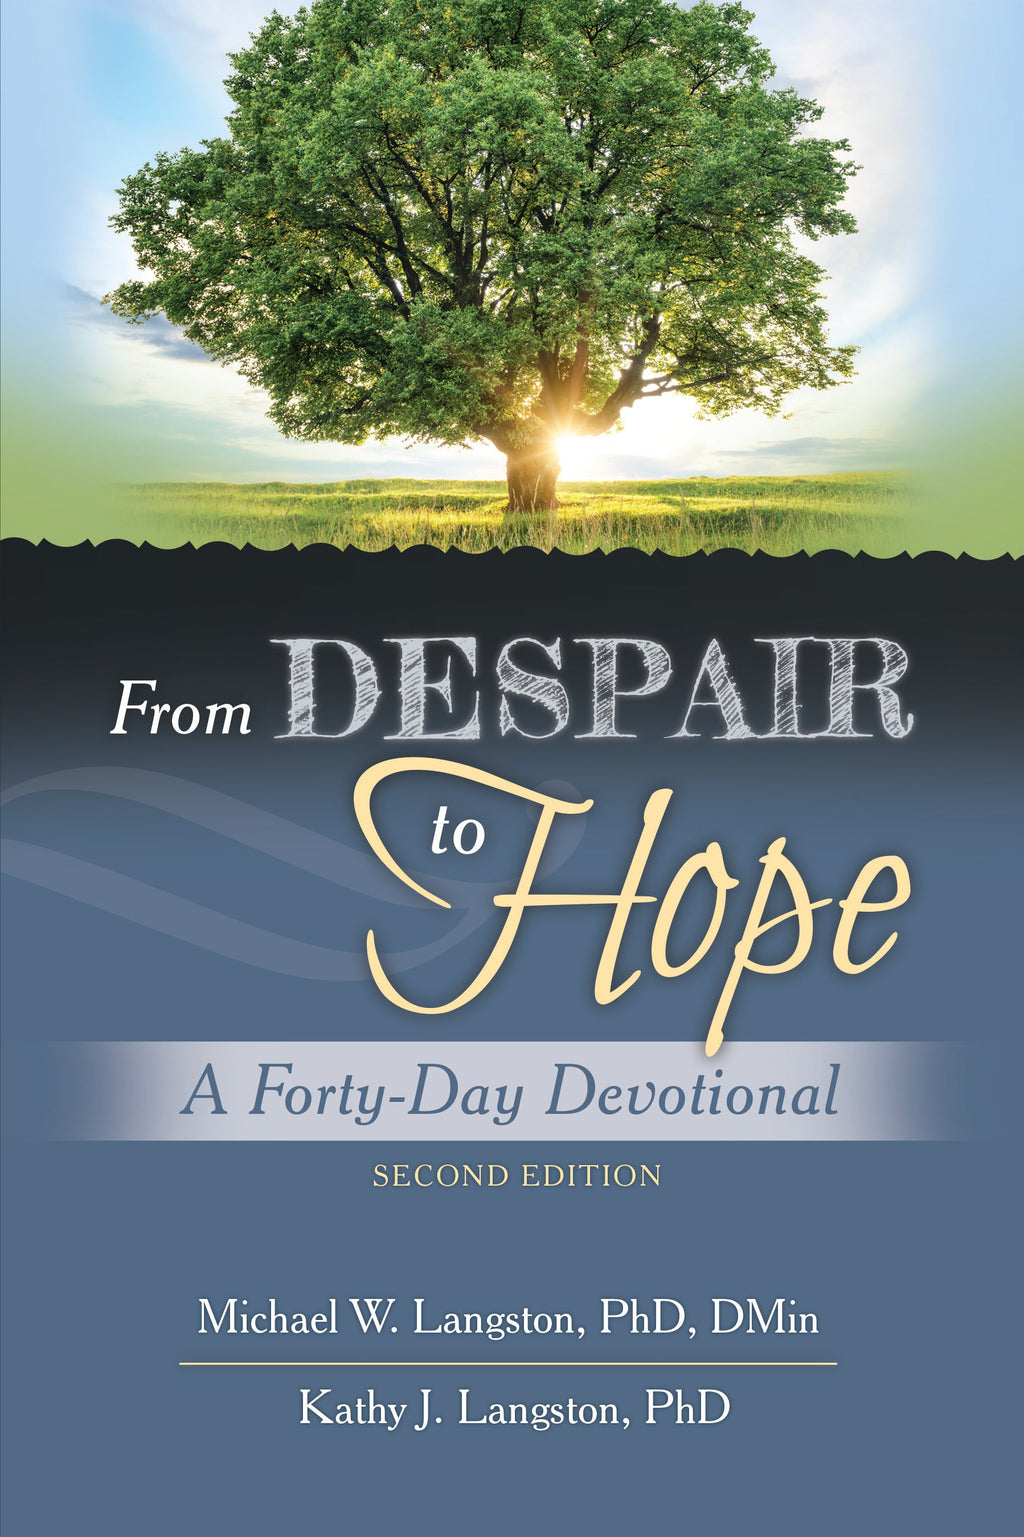 From Despair to Hope: A Forty-Day Devotional